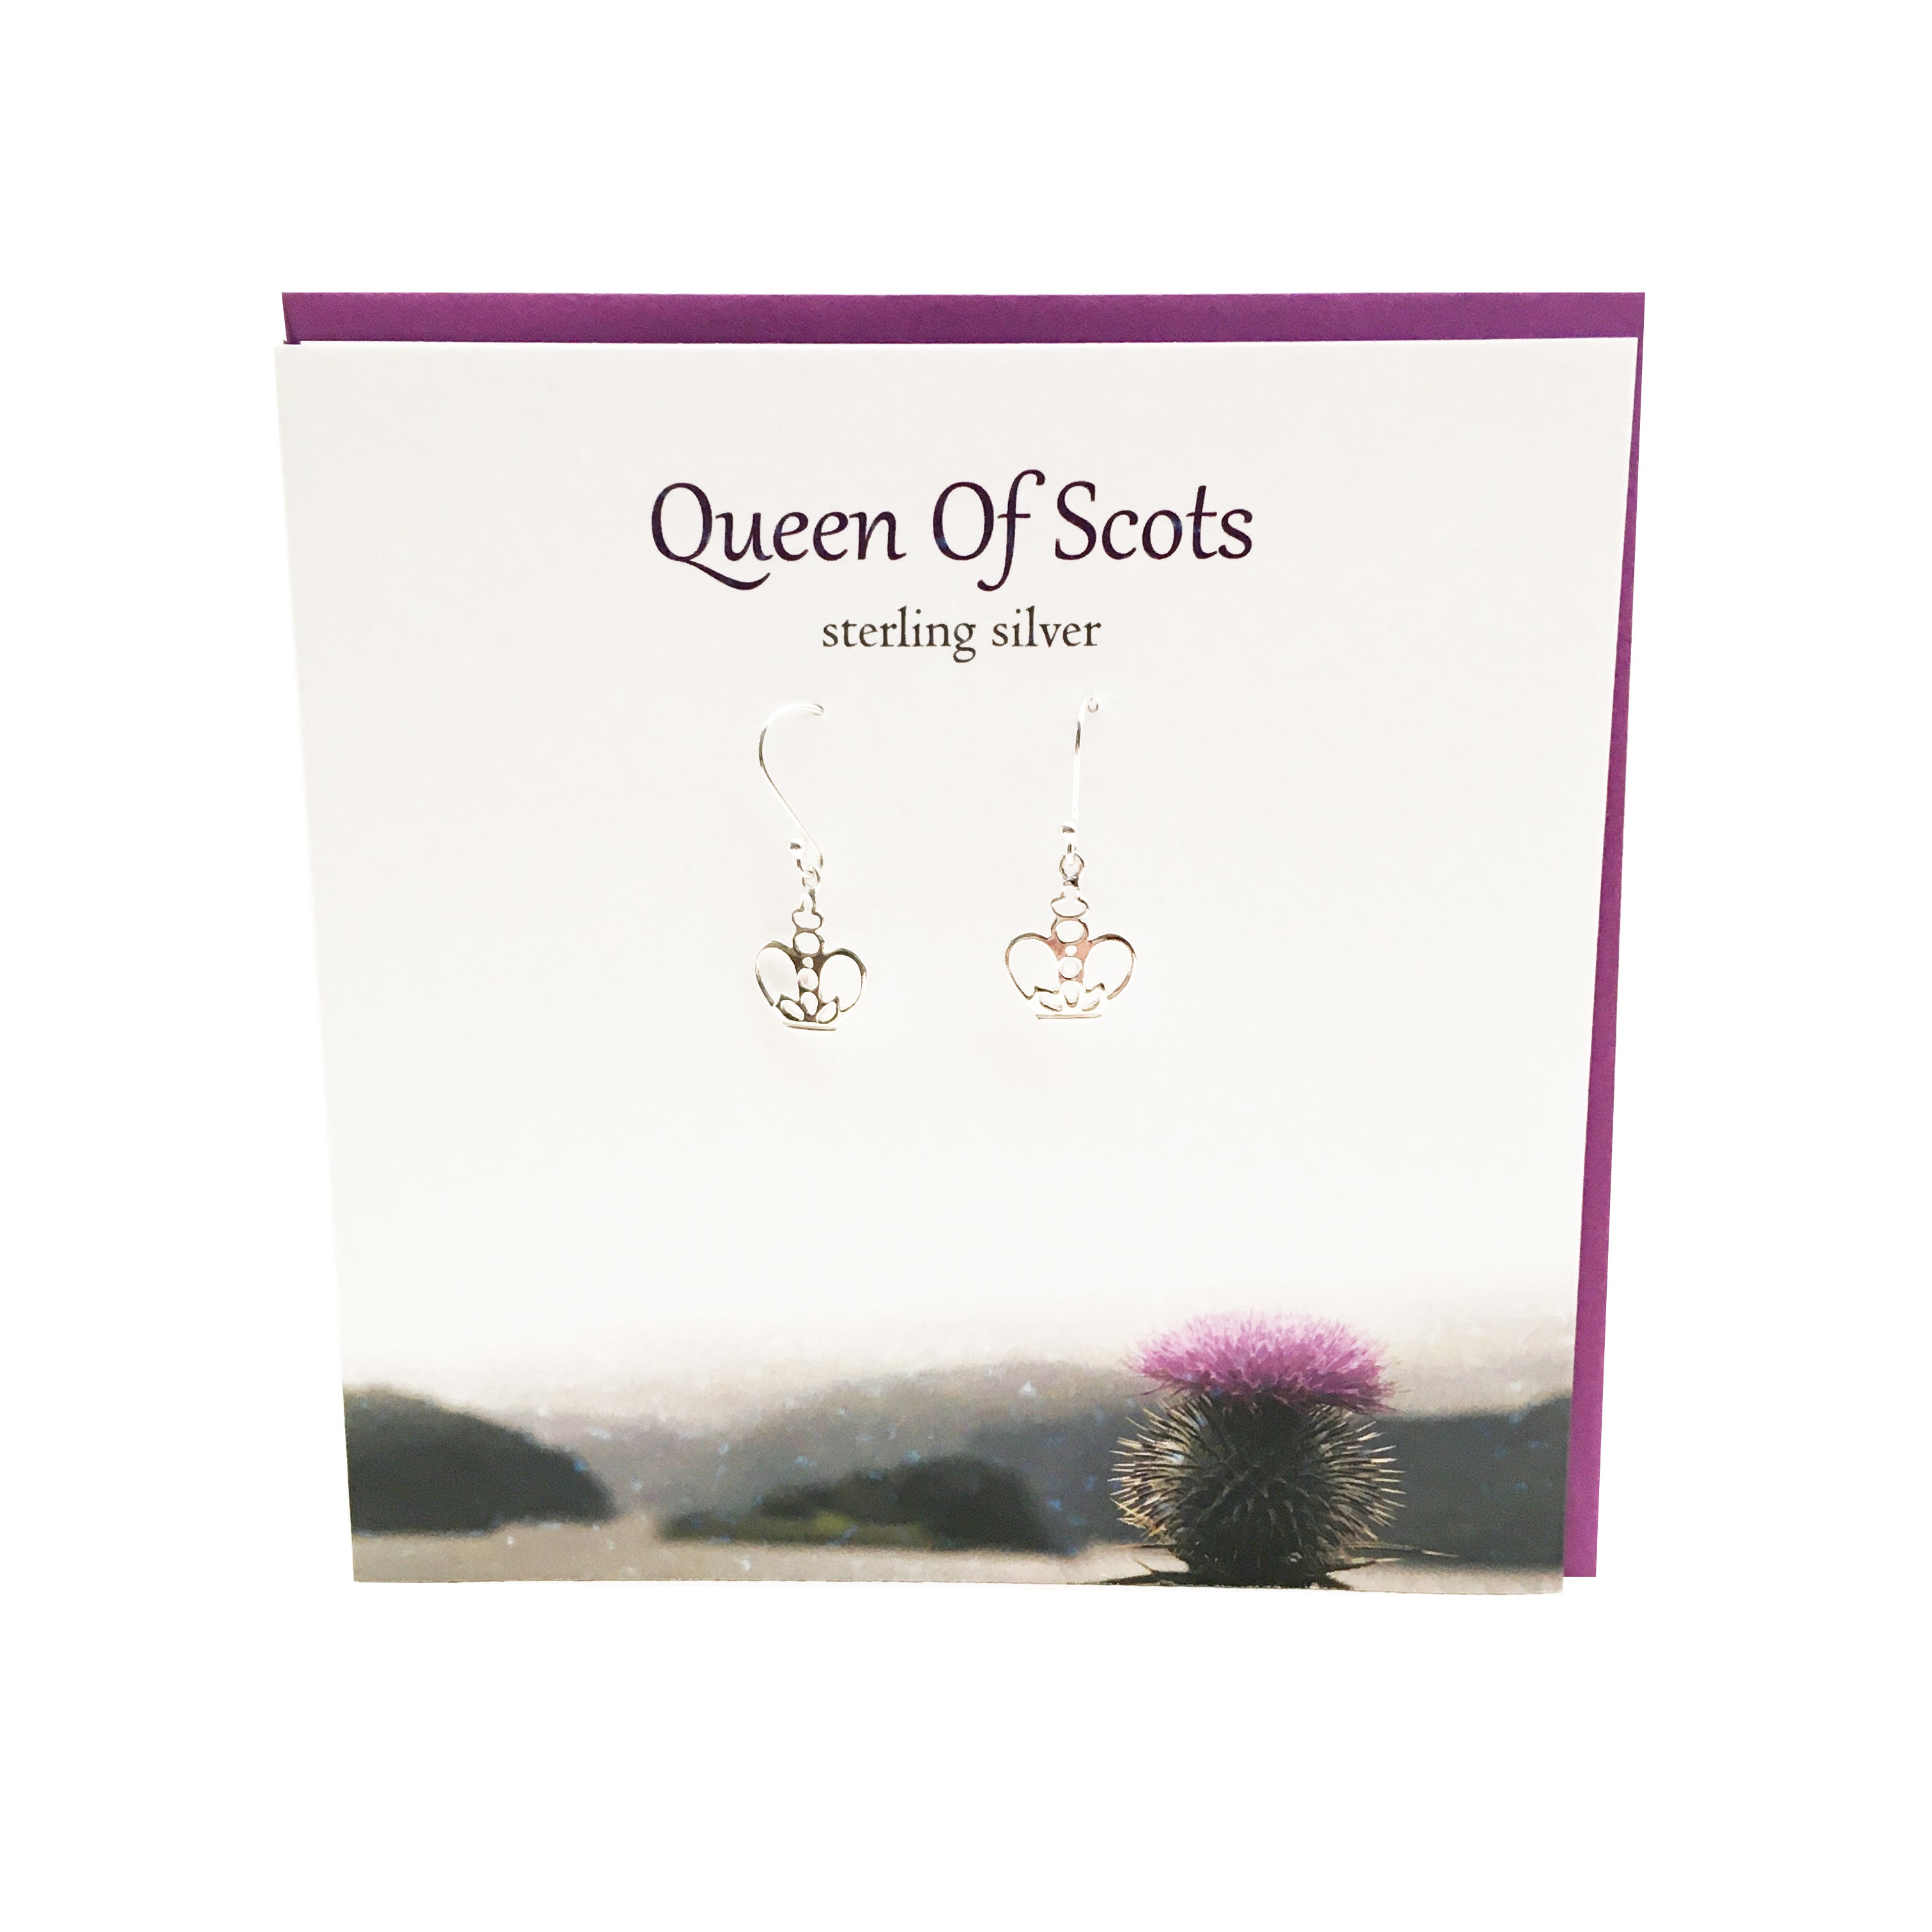 Queen of Scots Scottish crown silver earrings | The Silver Studio